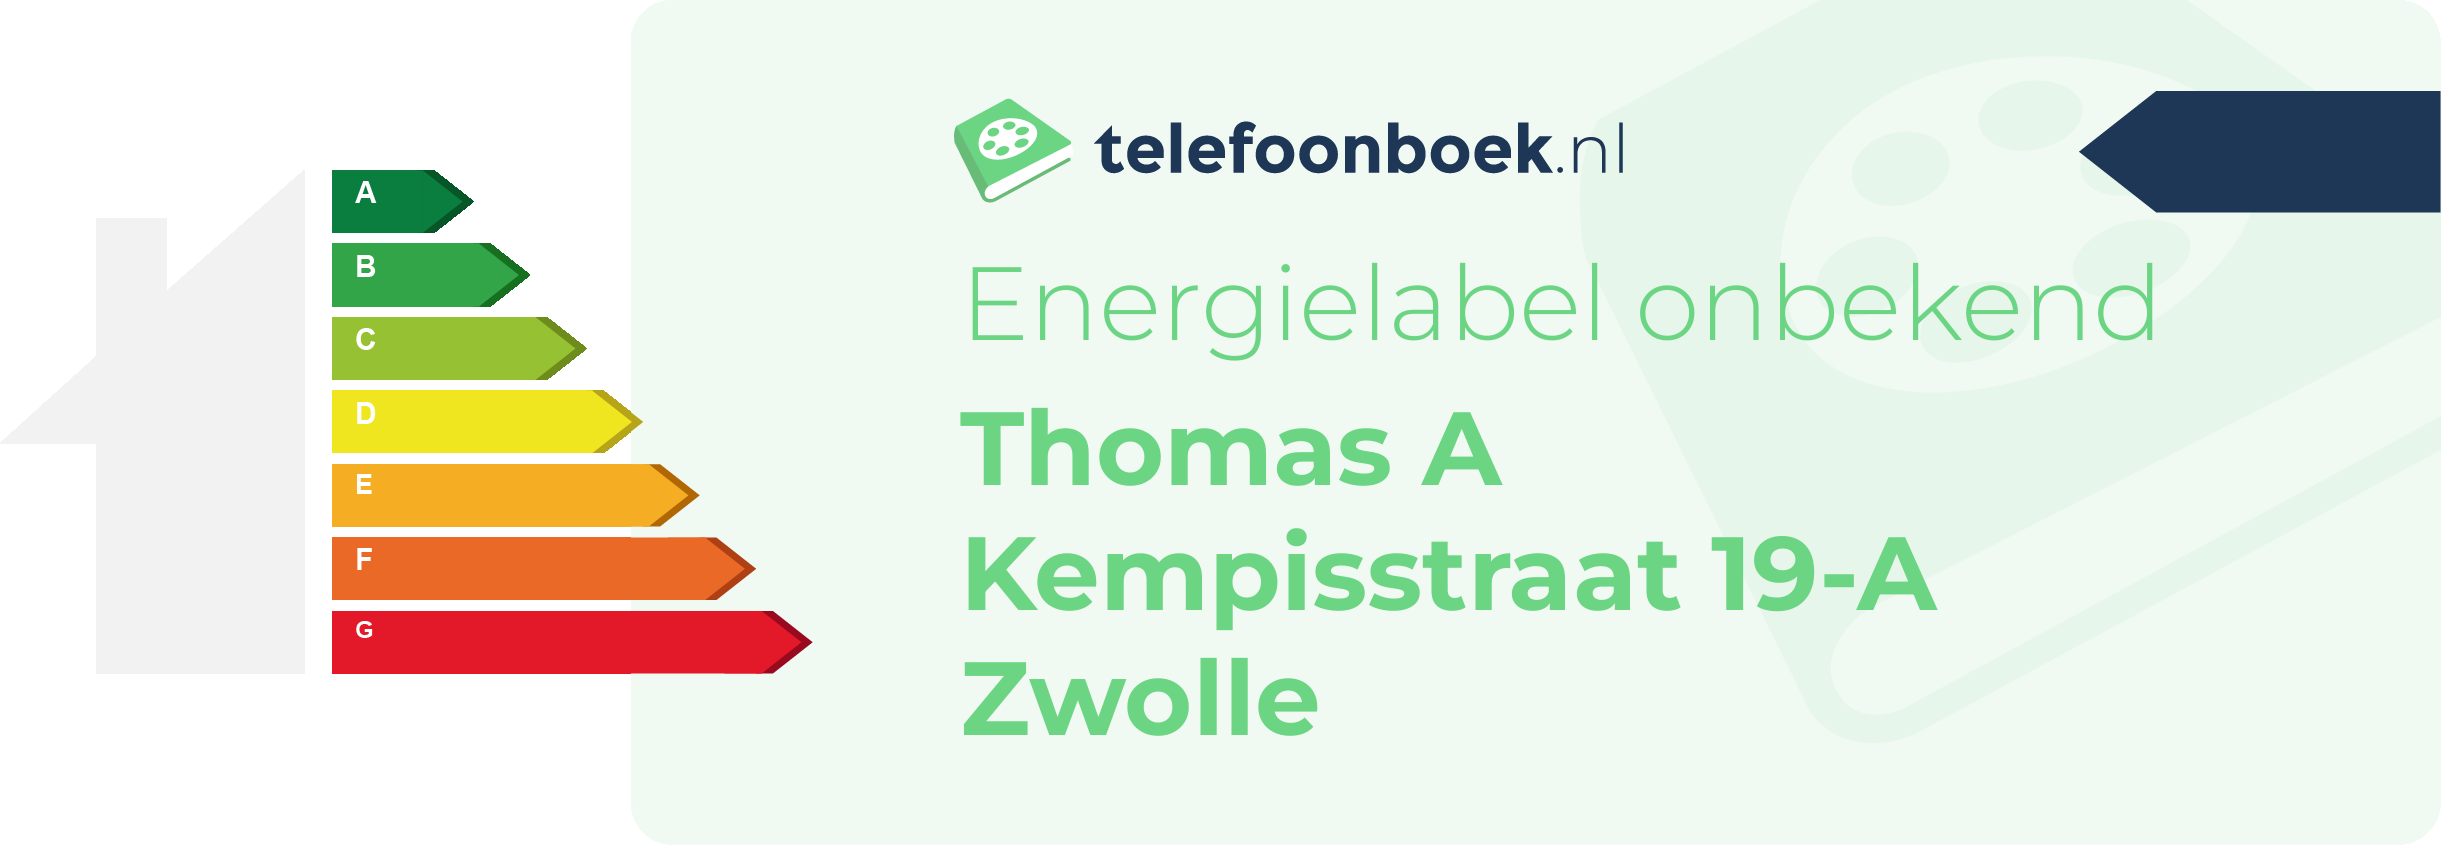 Energielabel Thomas A Kempisstraat 19-A Zwolle